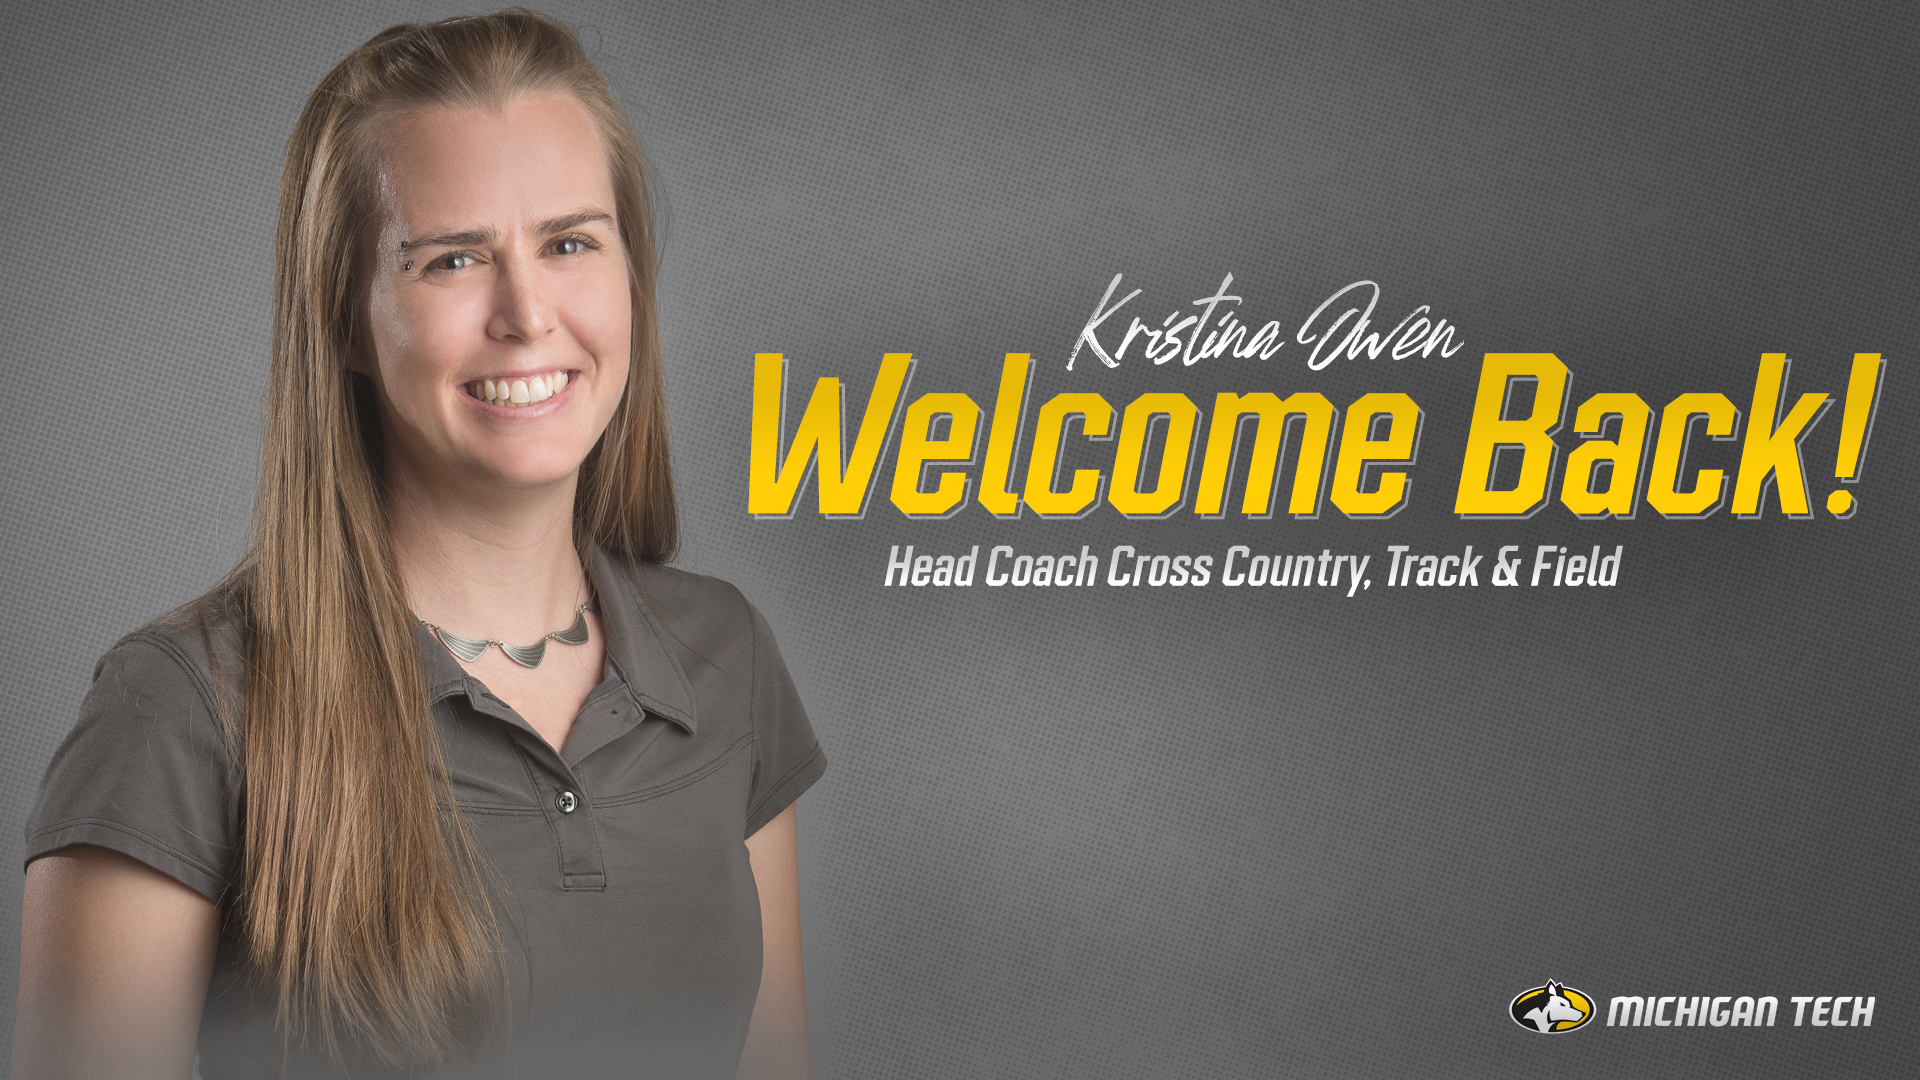 Kristina Owen named Head Coach of Cross Country and Track and Field